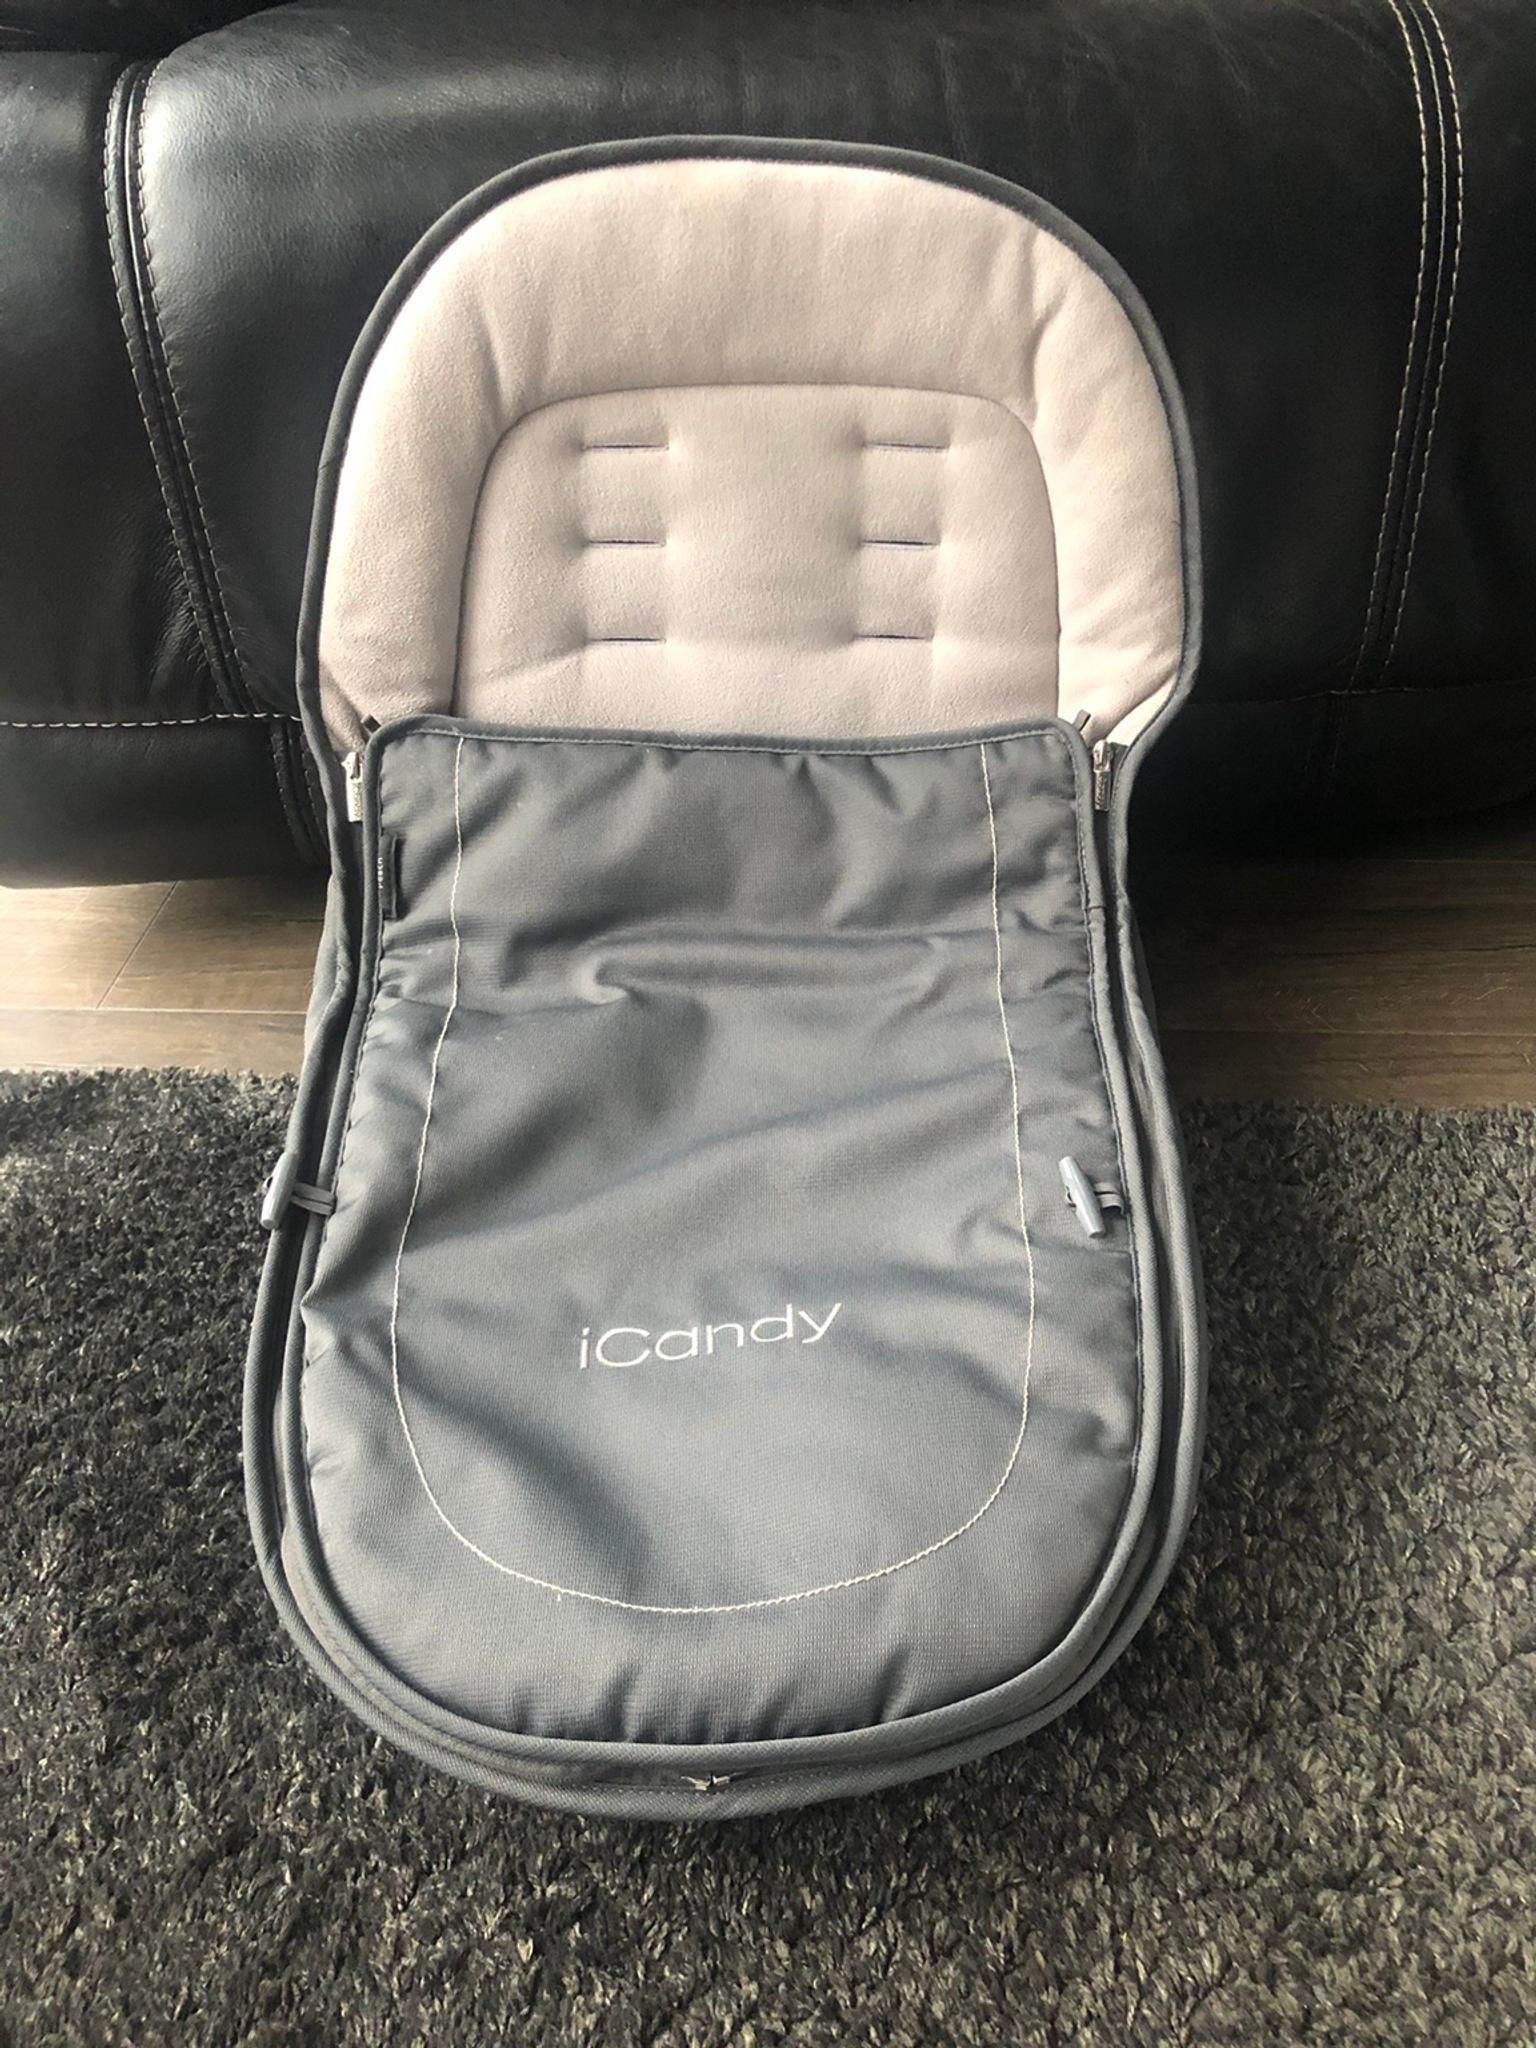 icandy peach compatible footmuff